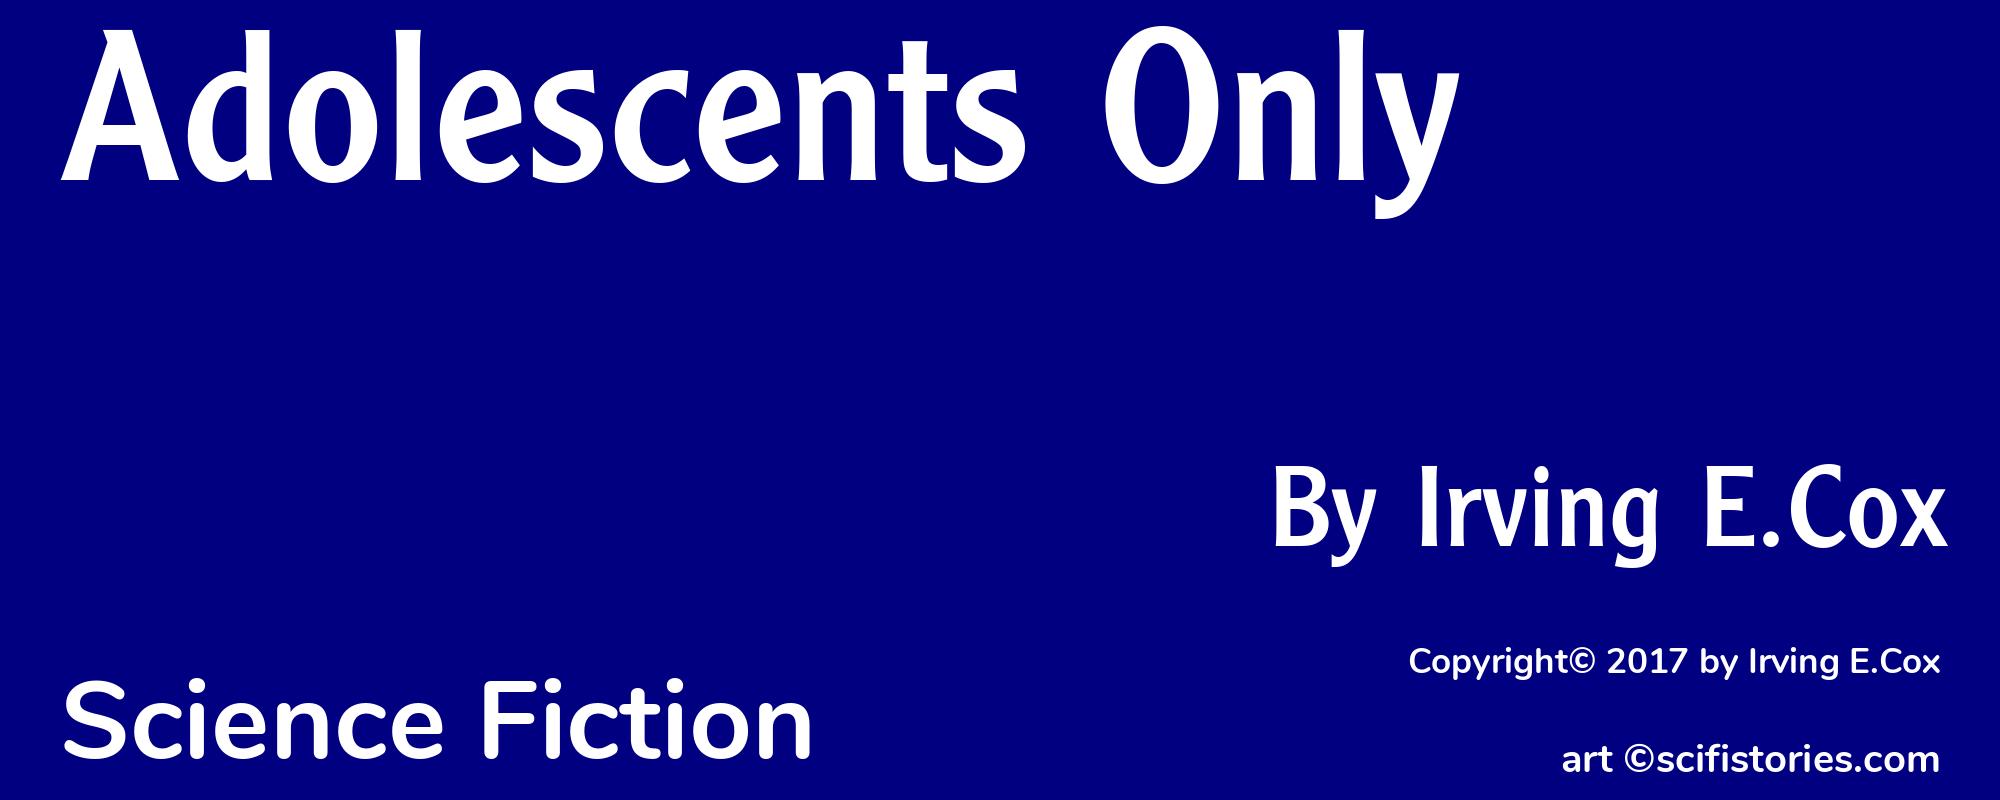 Adolescents Only - Cover